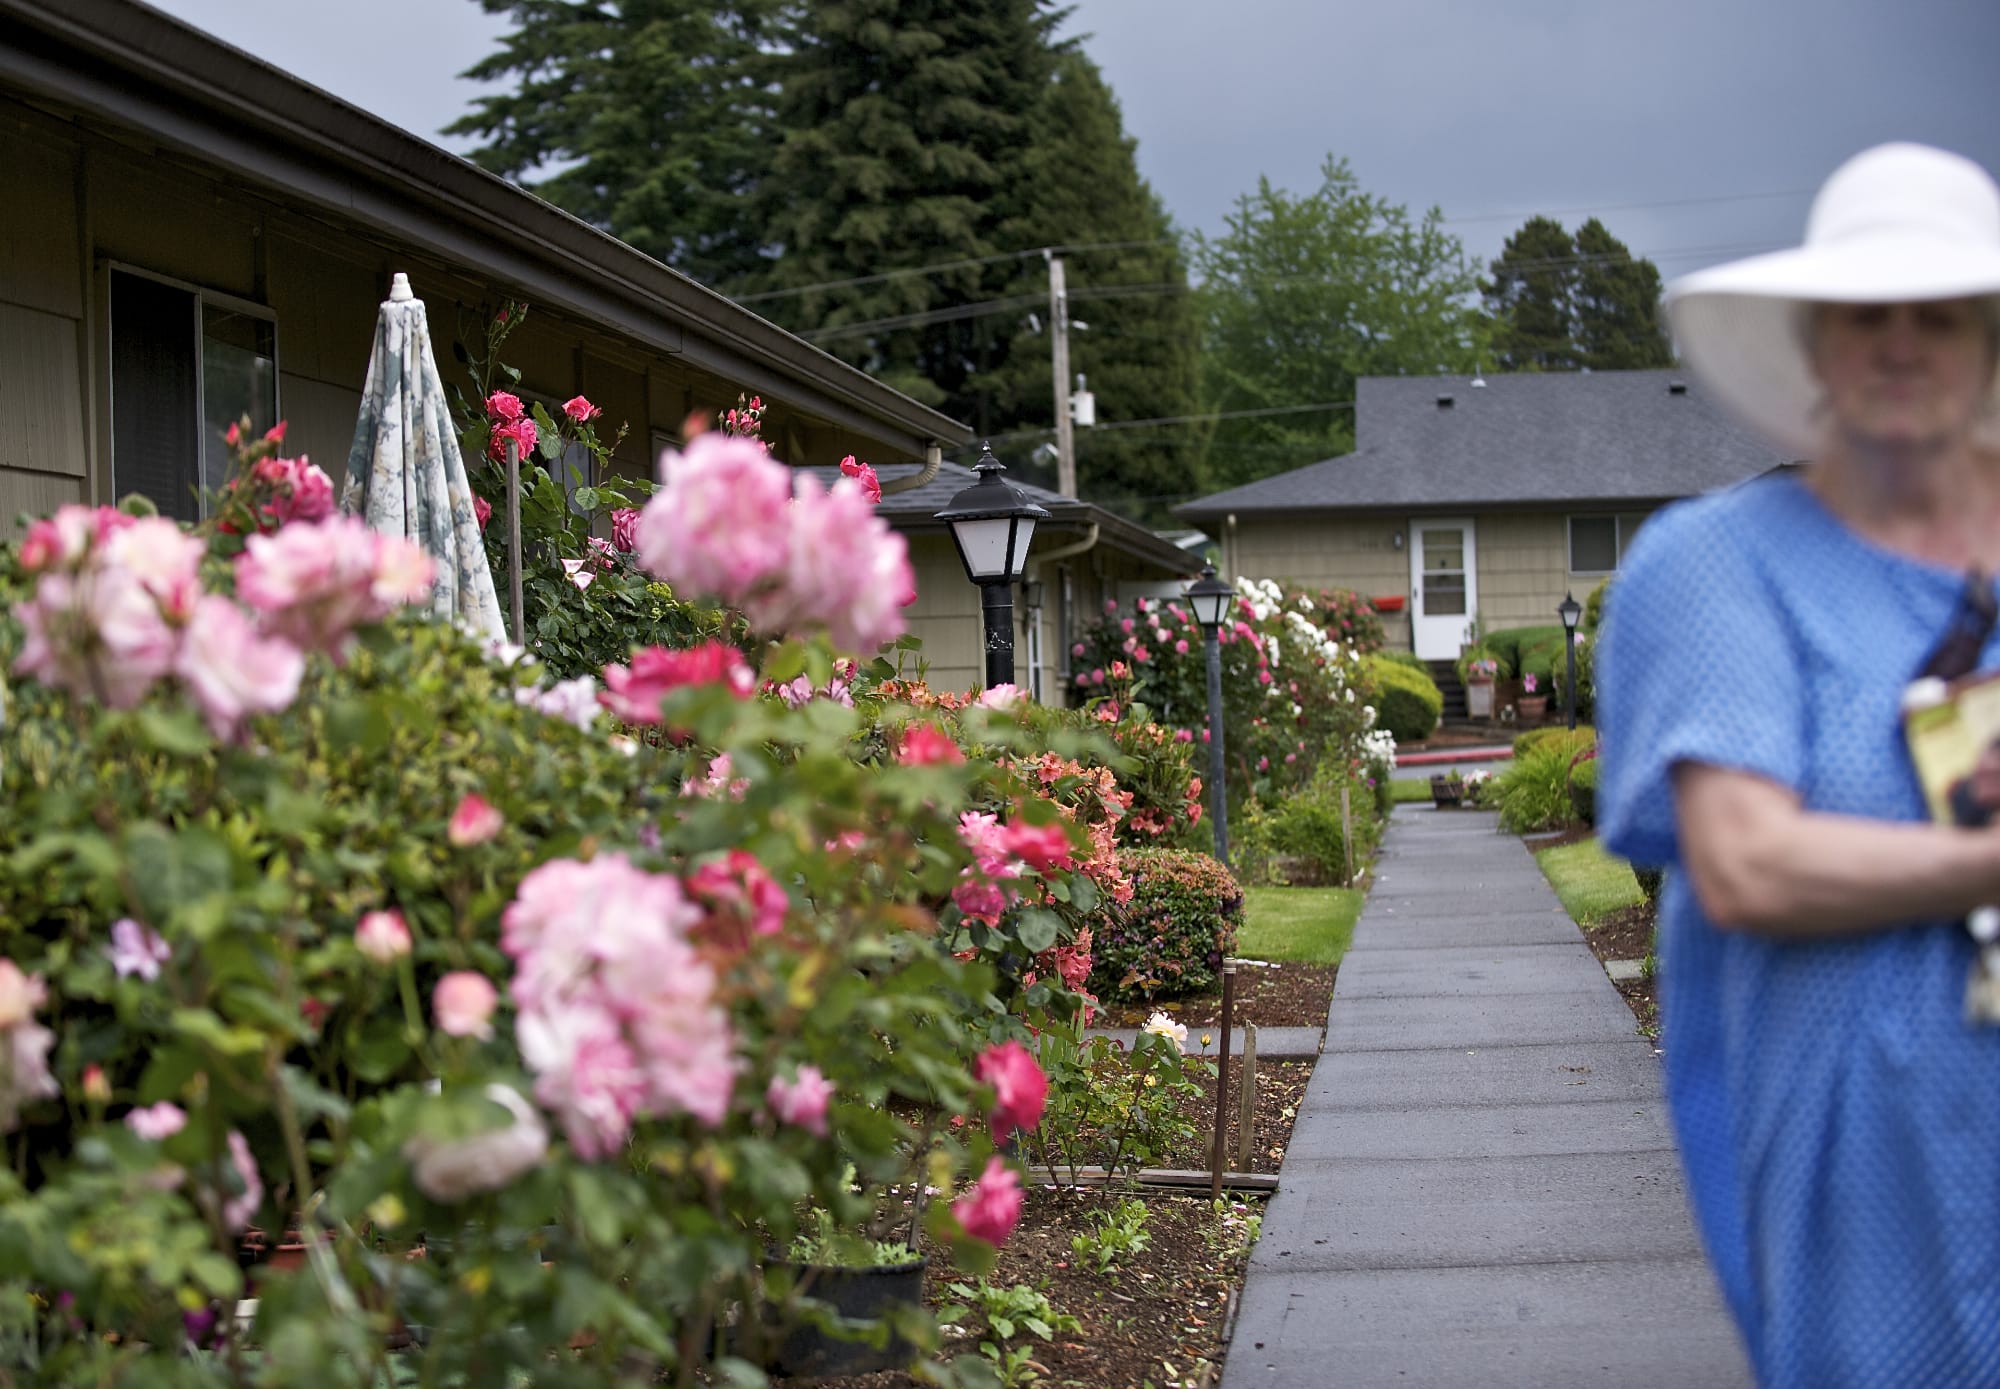 Vancouver resident Diana Robinson walks past a row of flower gardens at her apartment complex last week.